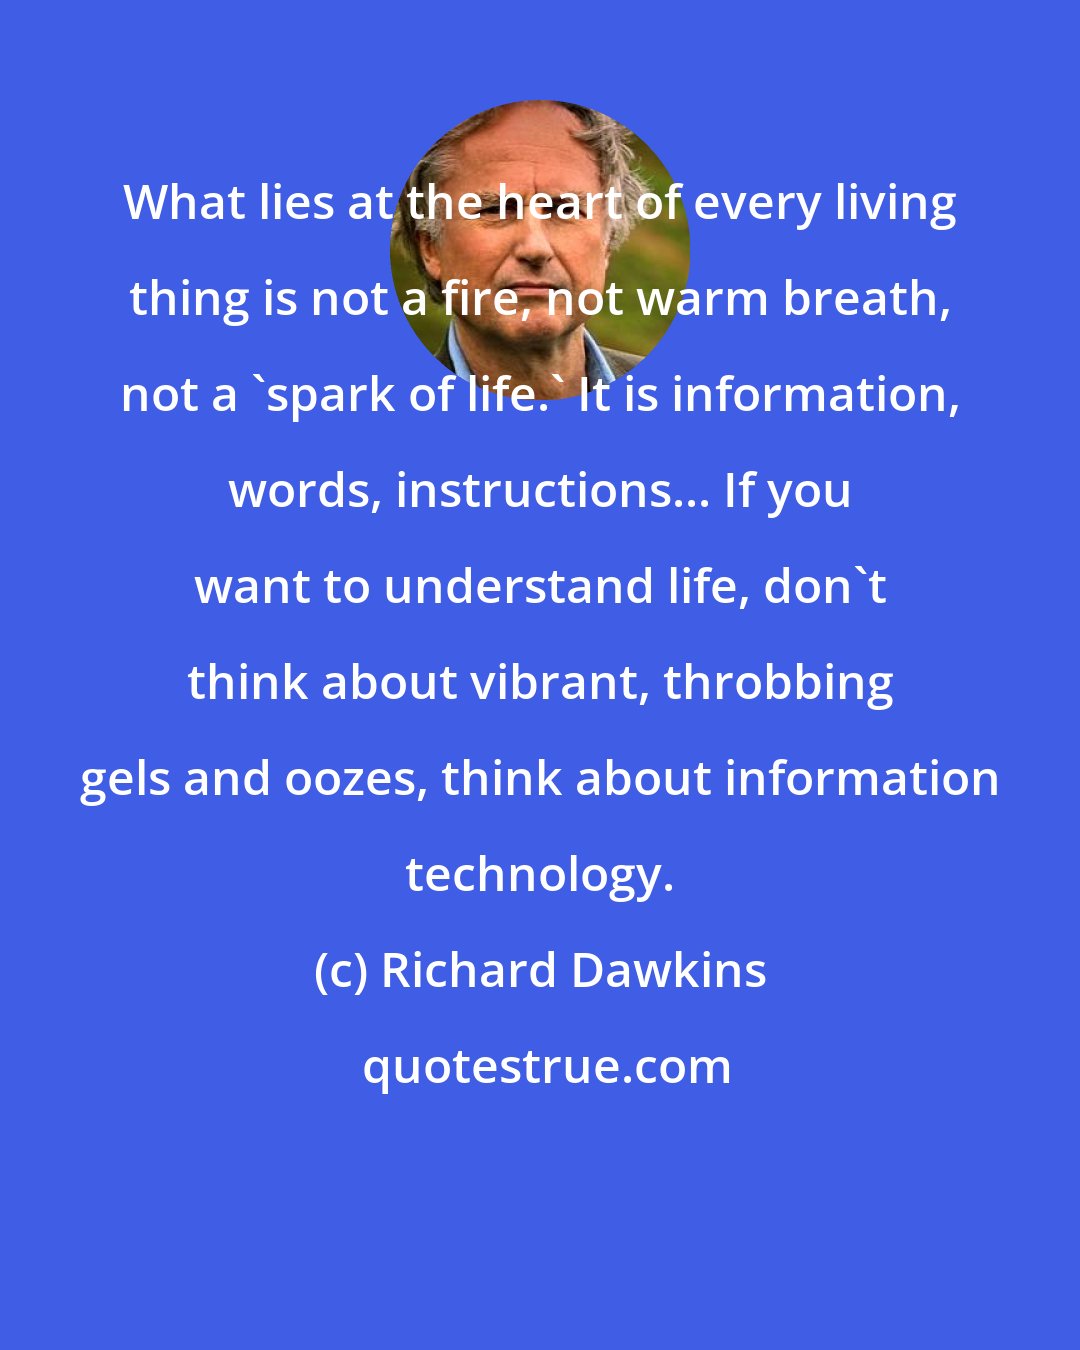 Richard Dawkins: What lies at the heart of every living thing is not a fire, not warm breath, not a 'spark of life.' It is information, words, instructions... If you want to understand life, don't think about vibrant, throbbing gels and oozes, think about information technology.